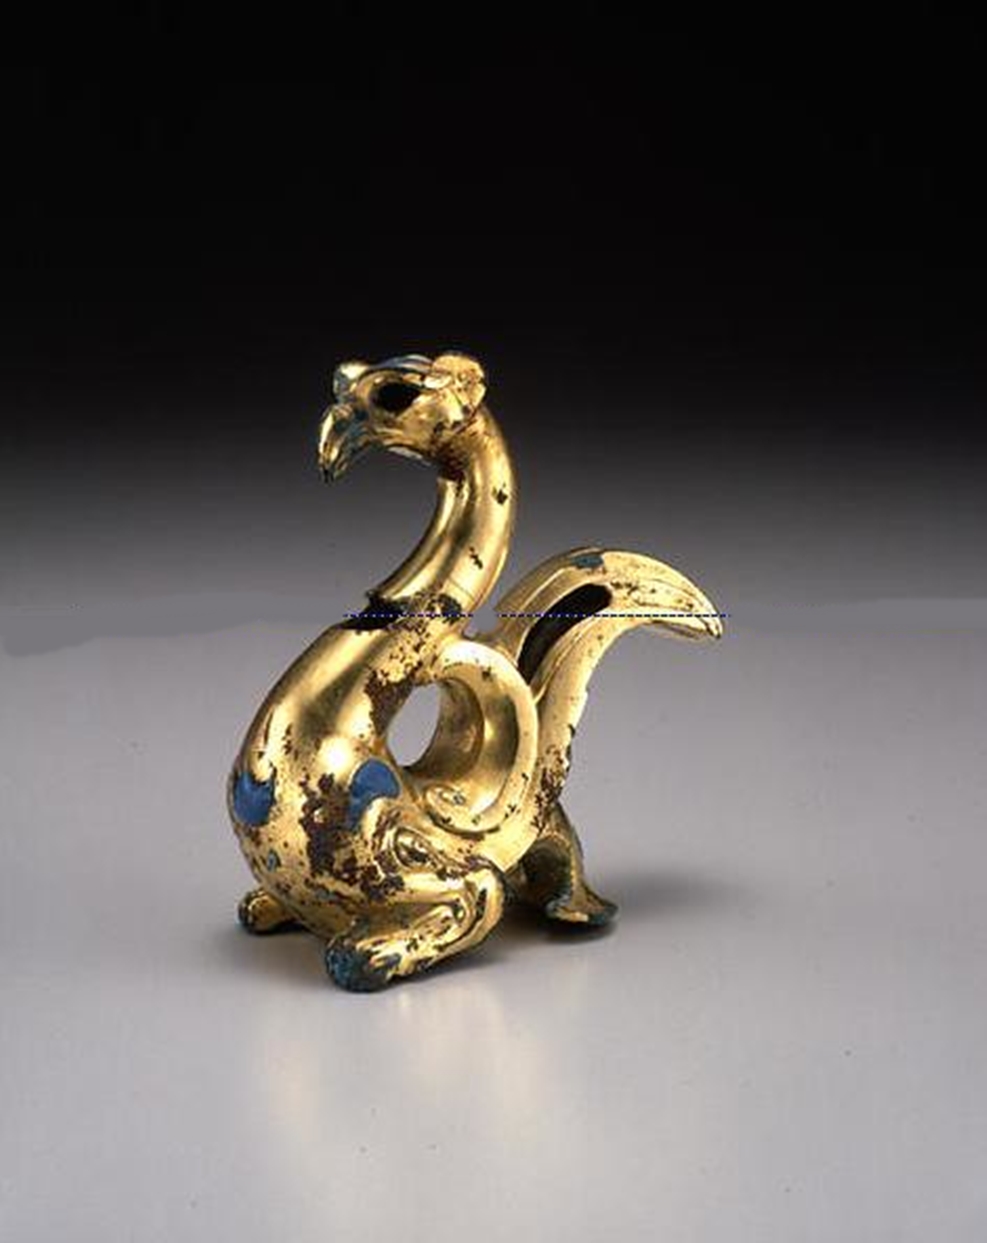 Western Han Chinese Gilded Bronze Ornament in the Form of a Mythical Animal with Glass Inlay